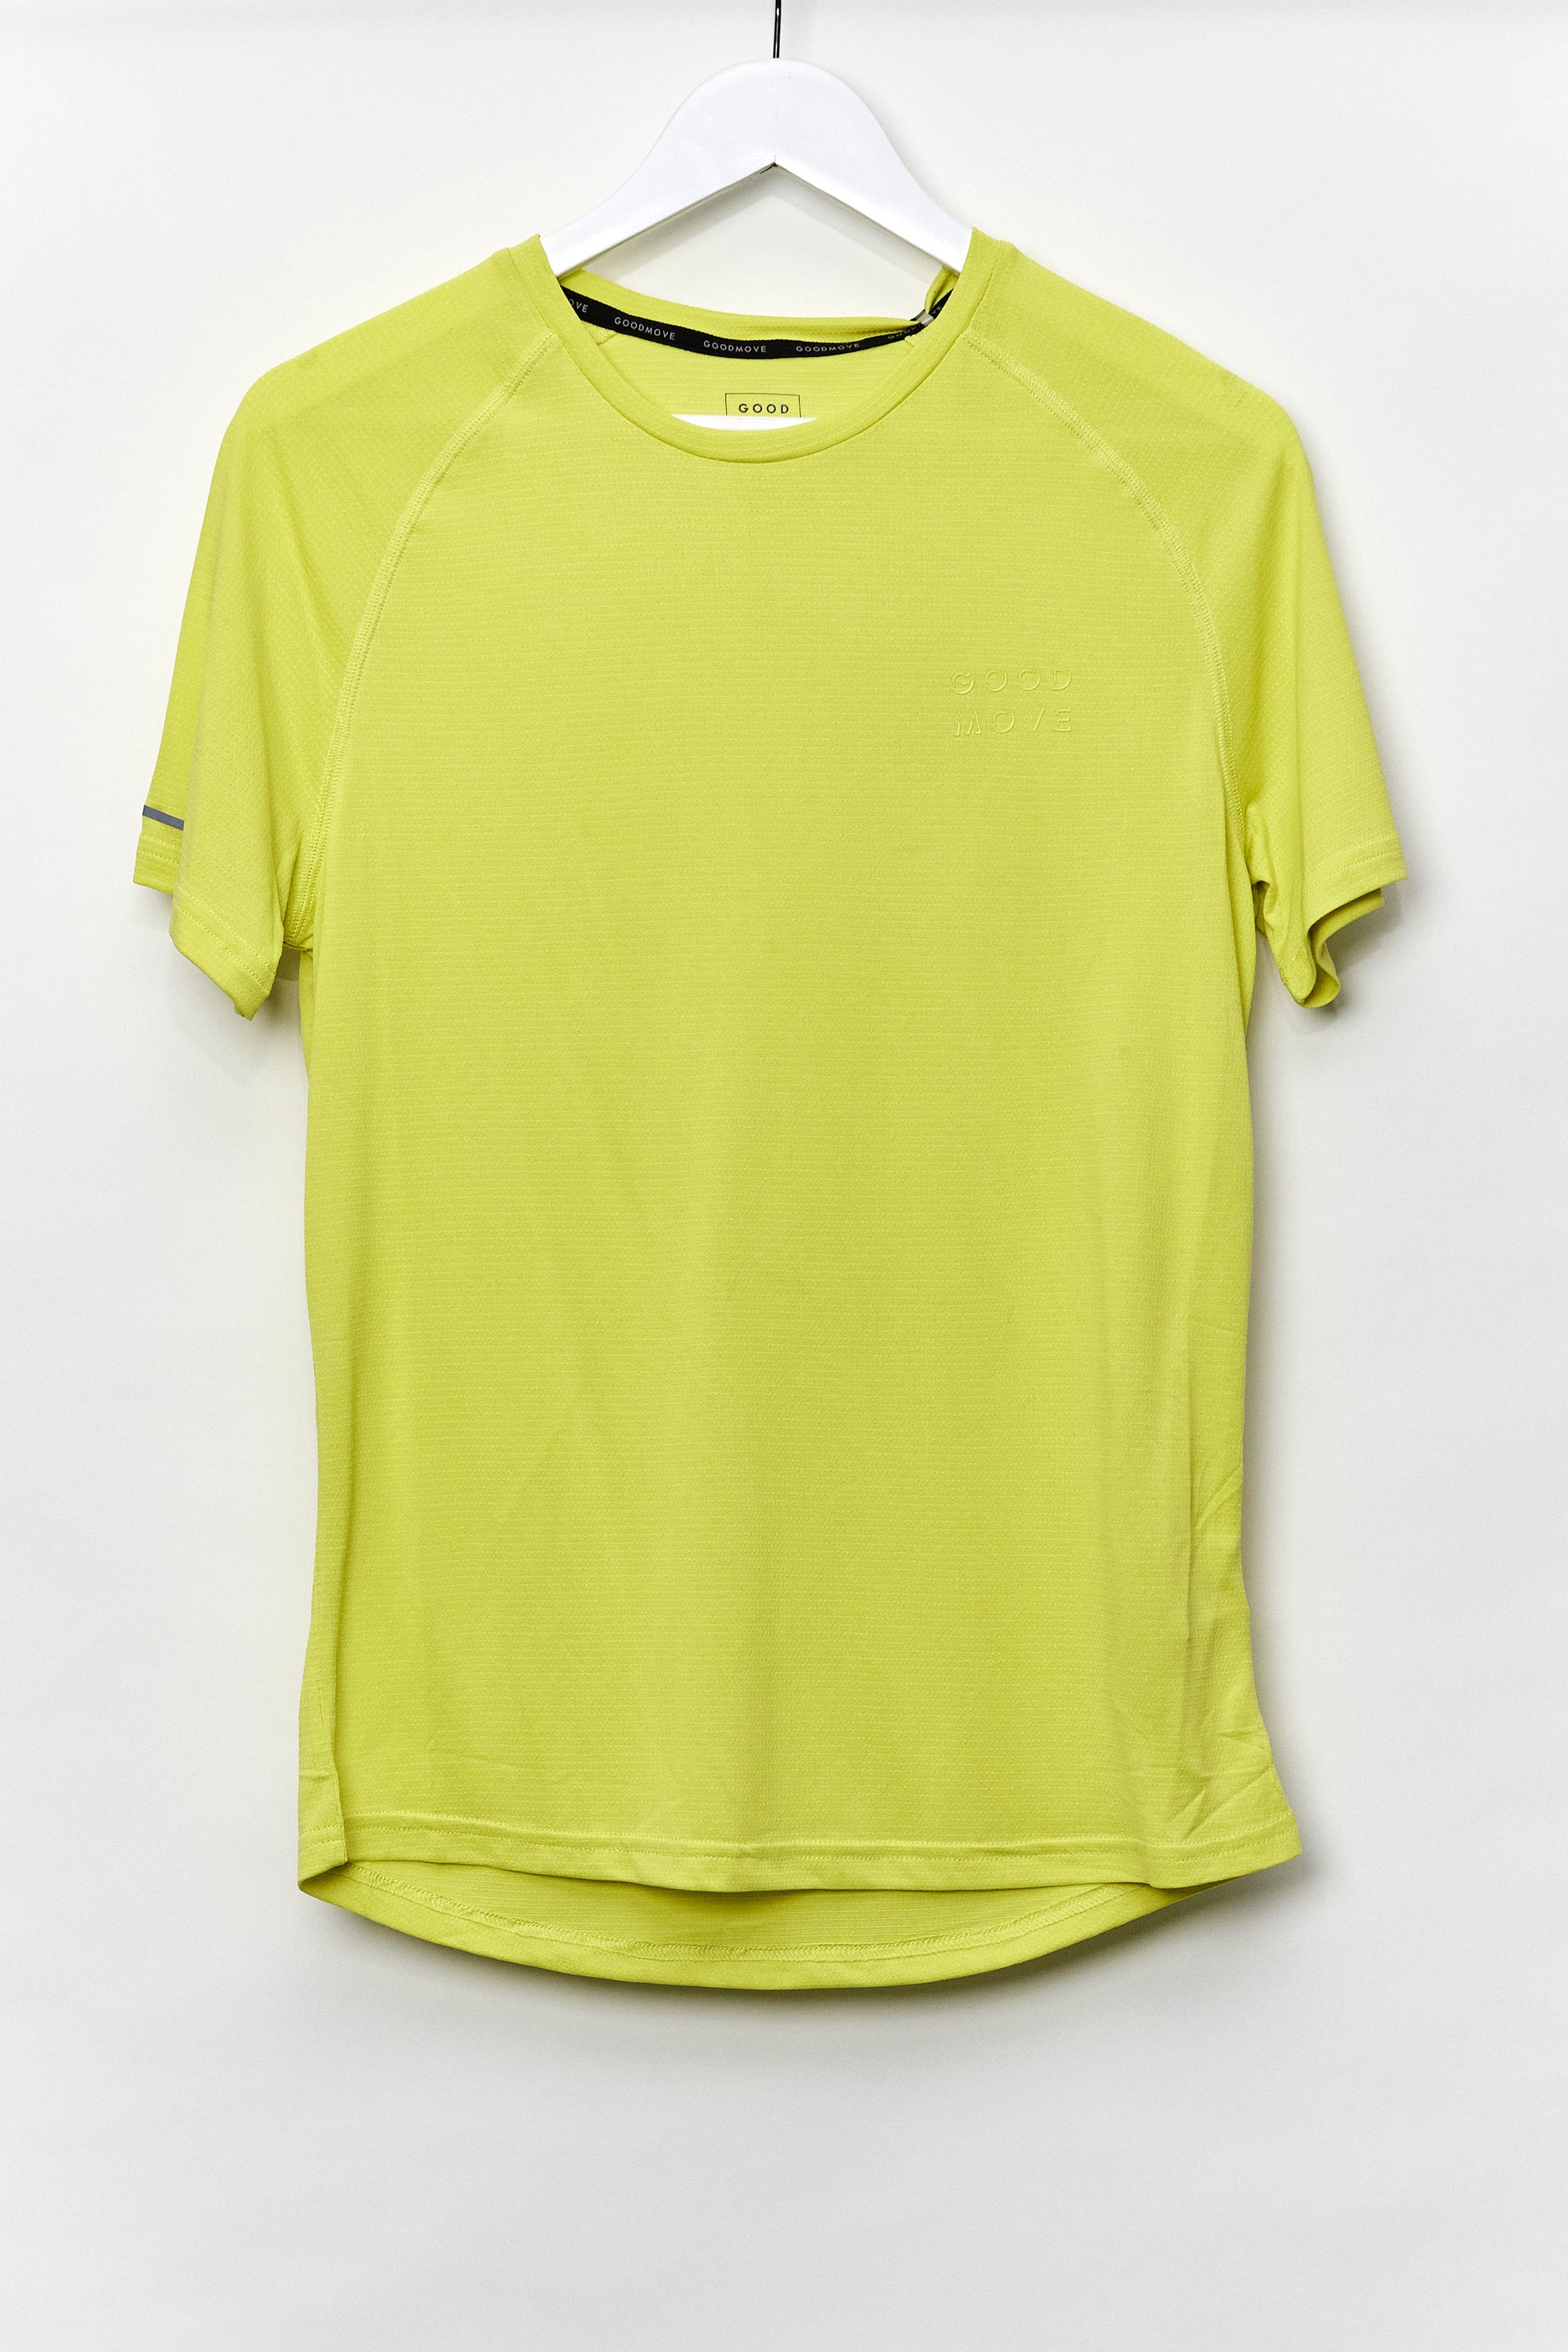 Mens M&S Goodmove Neon Yellow Sport top size Small – thestylingbank